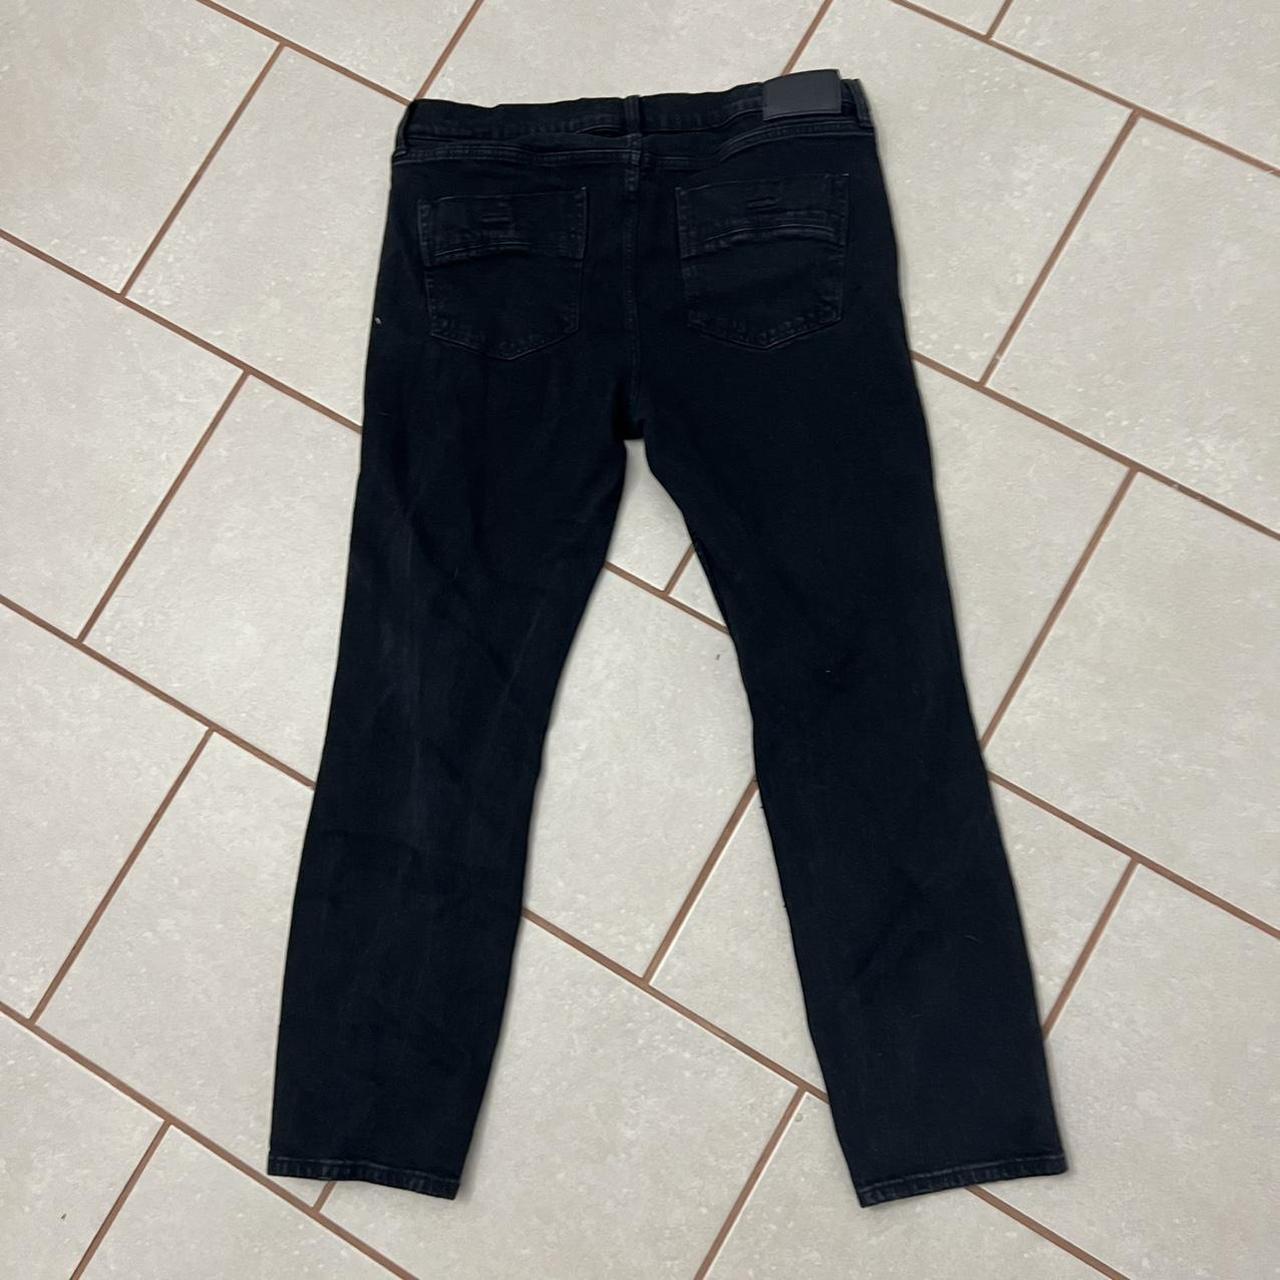 Product Image 2 - RSQ Skinny Distressed Jeans

Size 36x32

#distressed